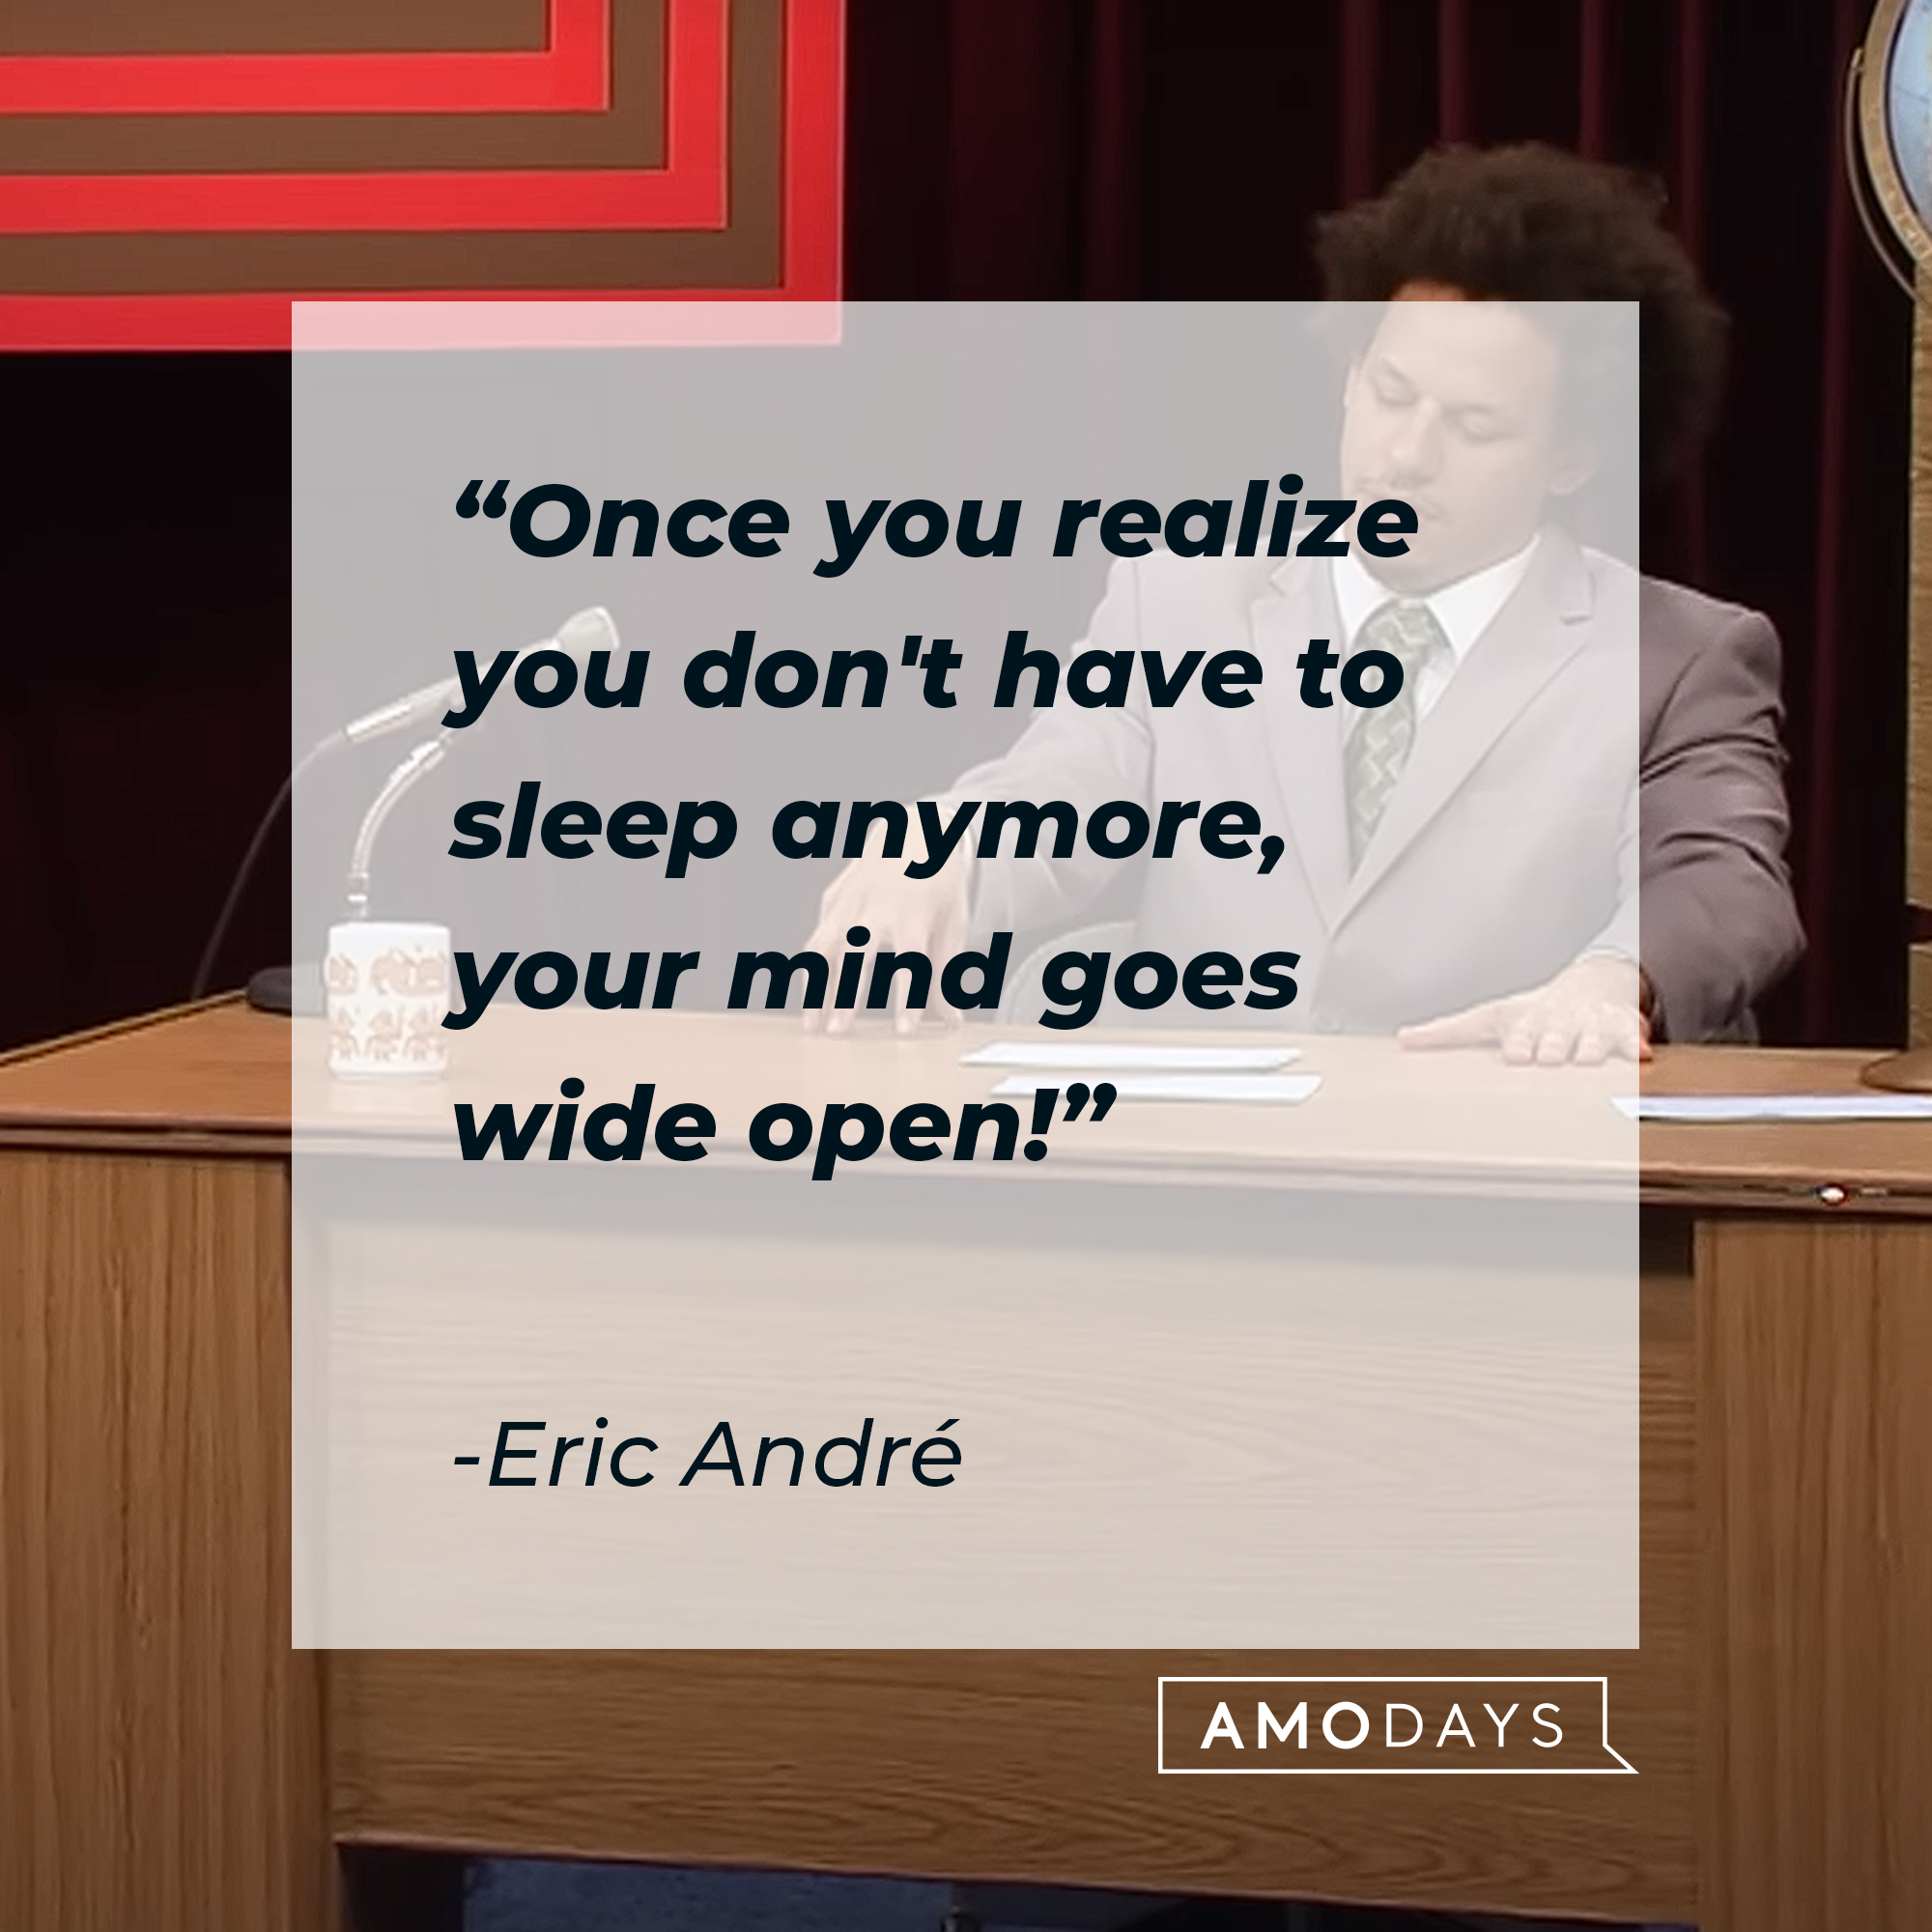 Eric André's quote: "Once you realize you don't have to sleep anymore, your mind goes wide open!" | Source: Youtube.com/adultswim